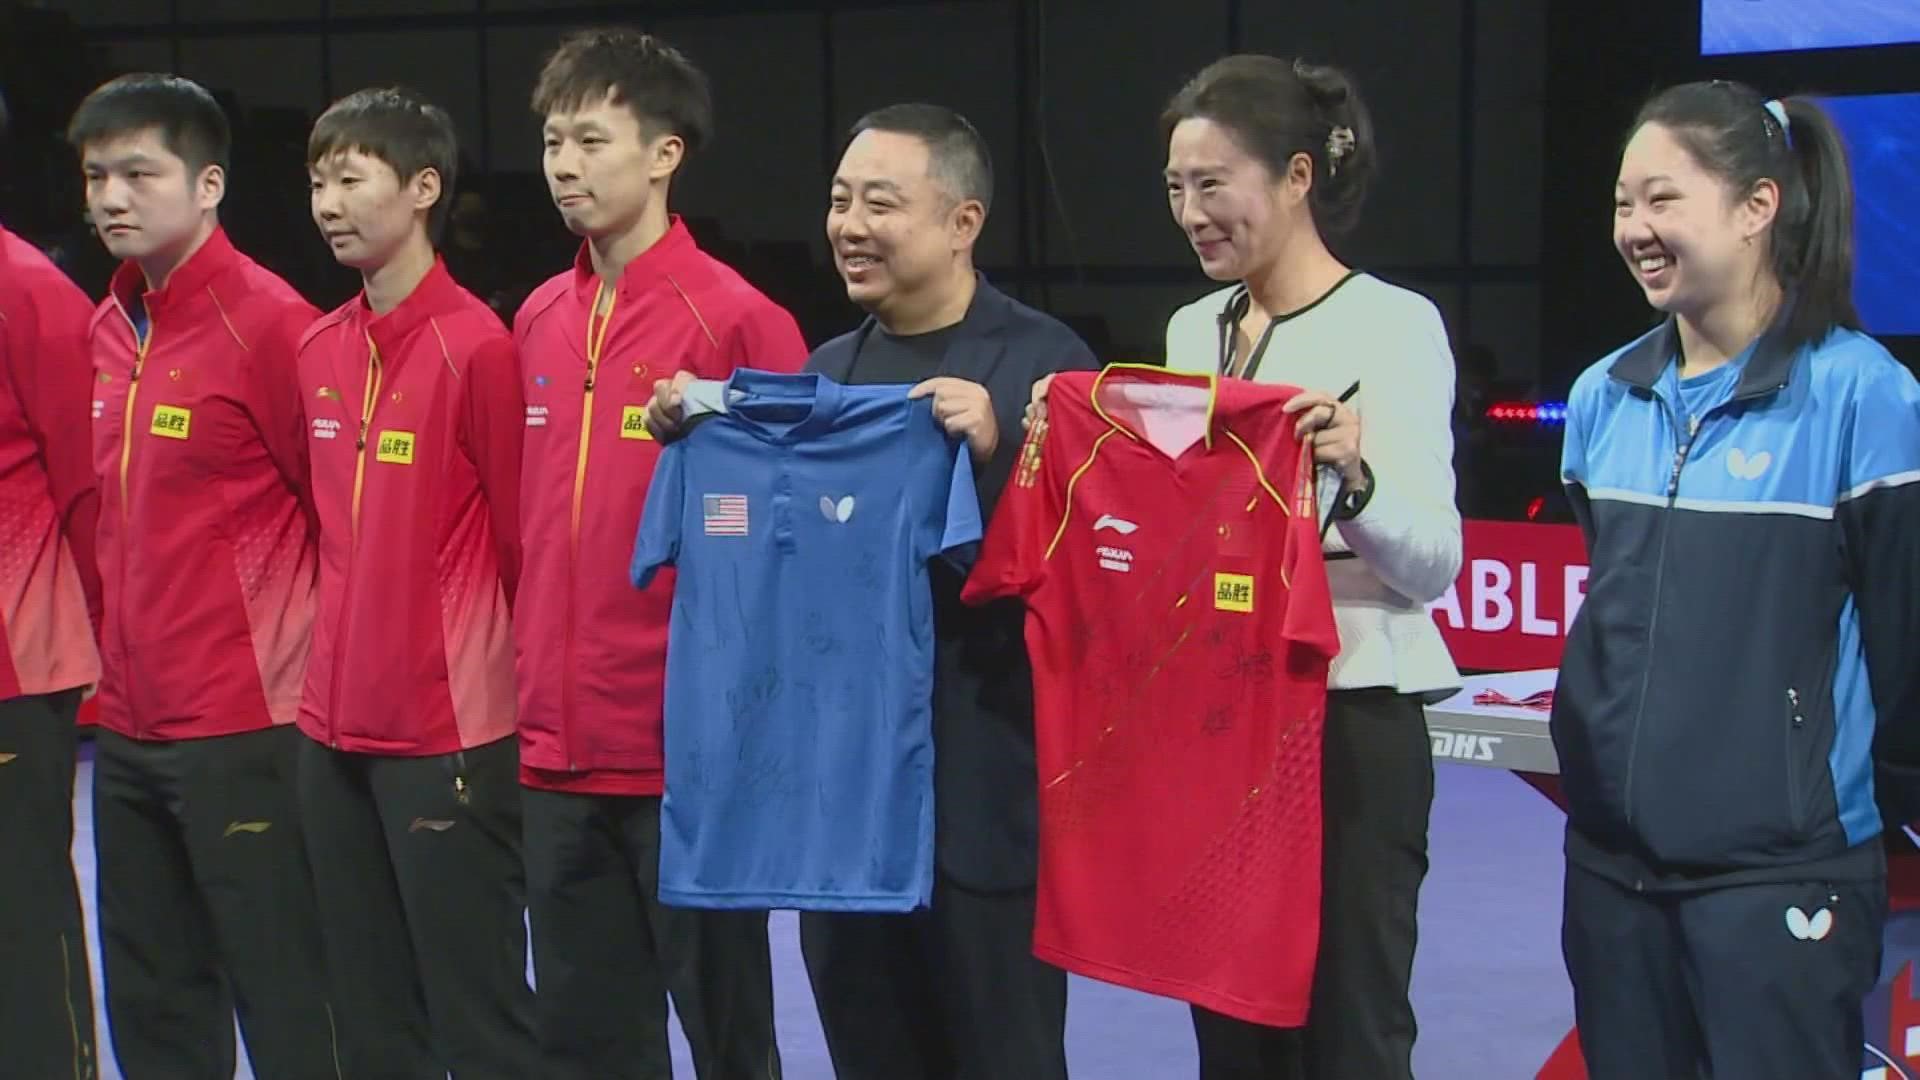 Two pairs formed of both American and Chinese players entered the Mixed Doubles competition on the 50th anniversary of Ping Pong Diplomacy.